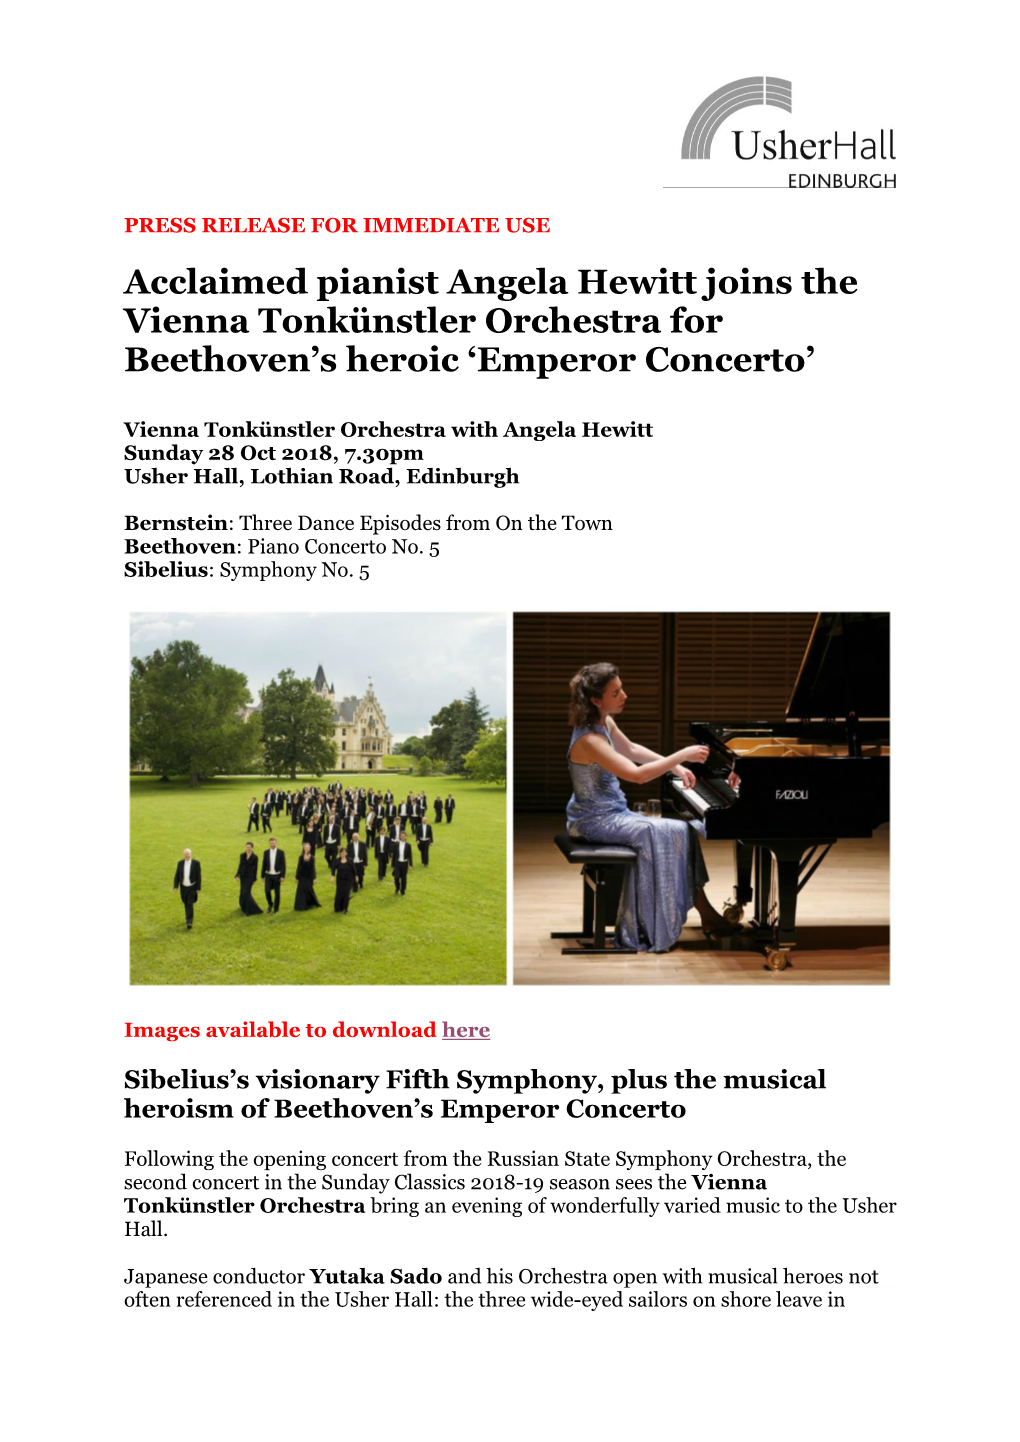 Acclaimed Pianist Angela Hewitt Joins the Vienna Tonkünstler Orchestra for Beethoven's Heroic 'Emperor Concerto'